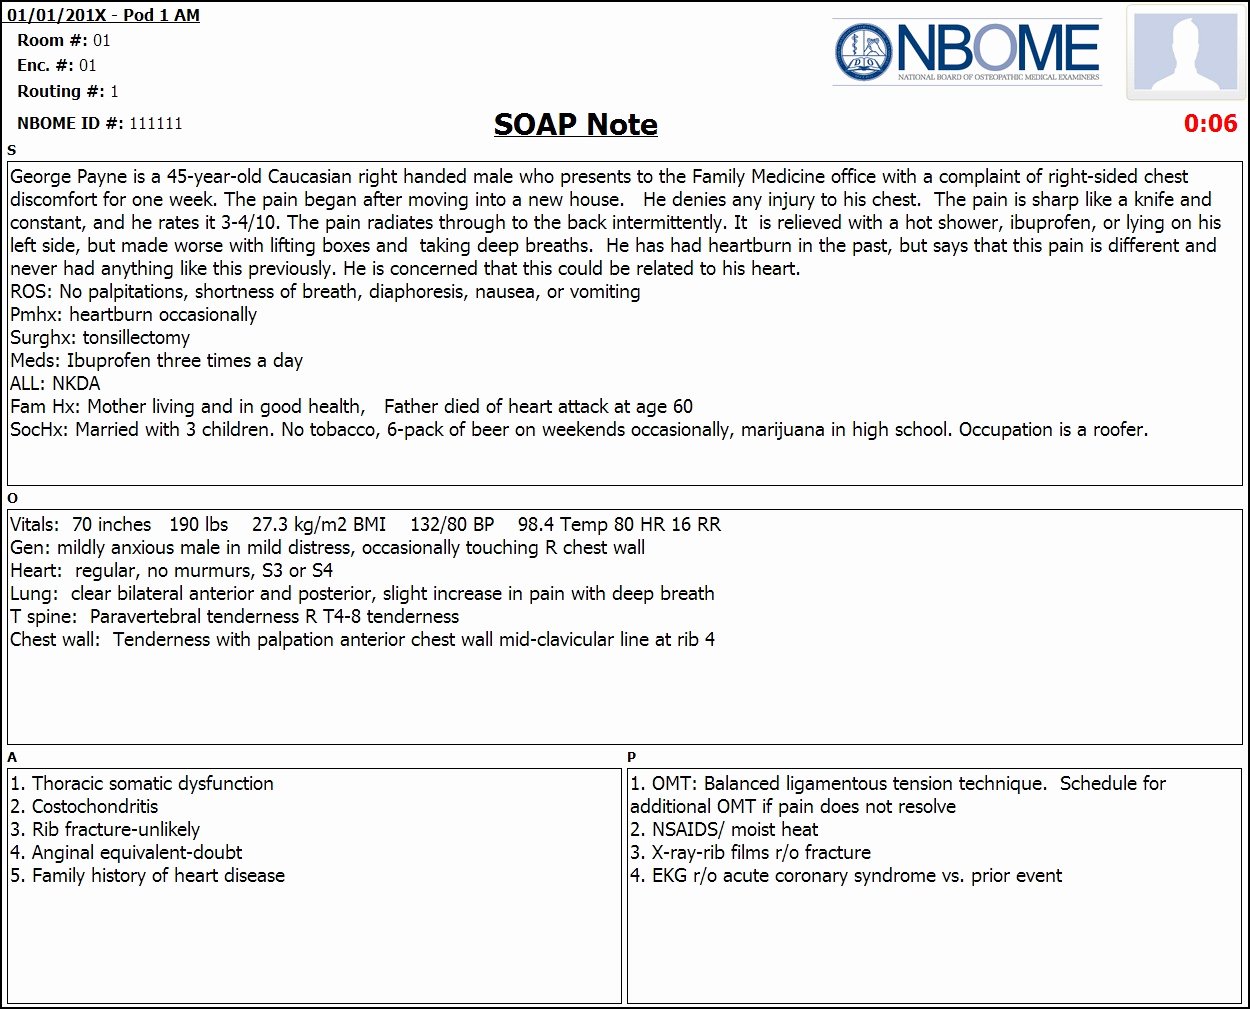 Soap Charting Examples Awesome Pleted Esoap Note Sample — Nbome